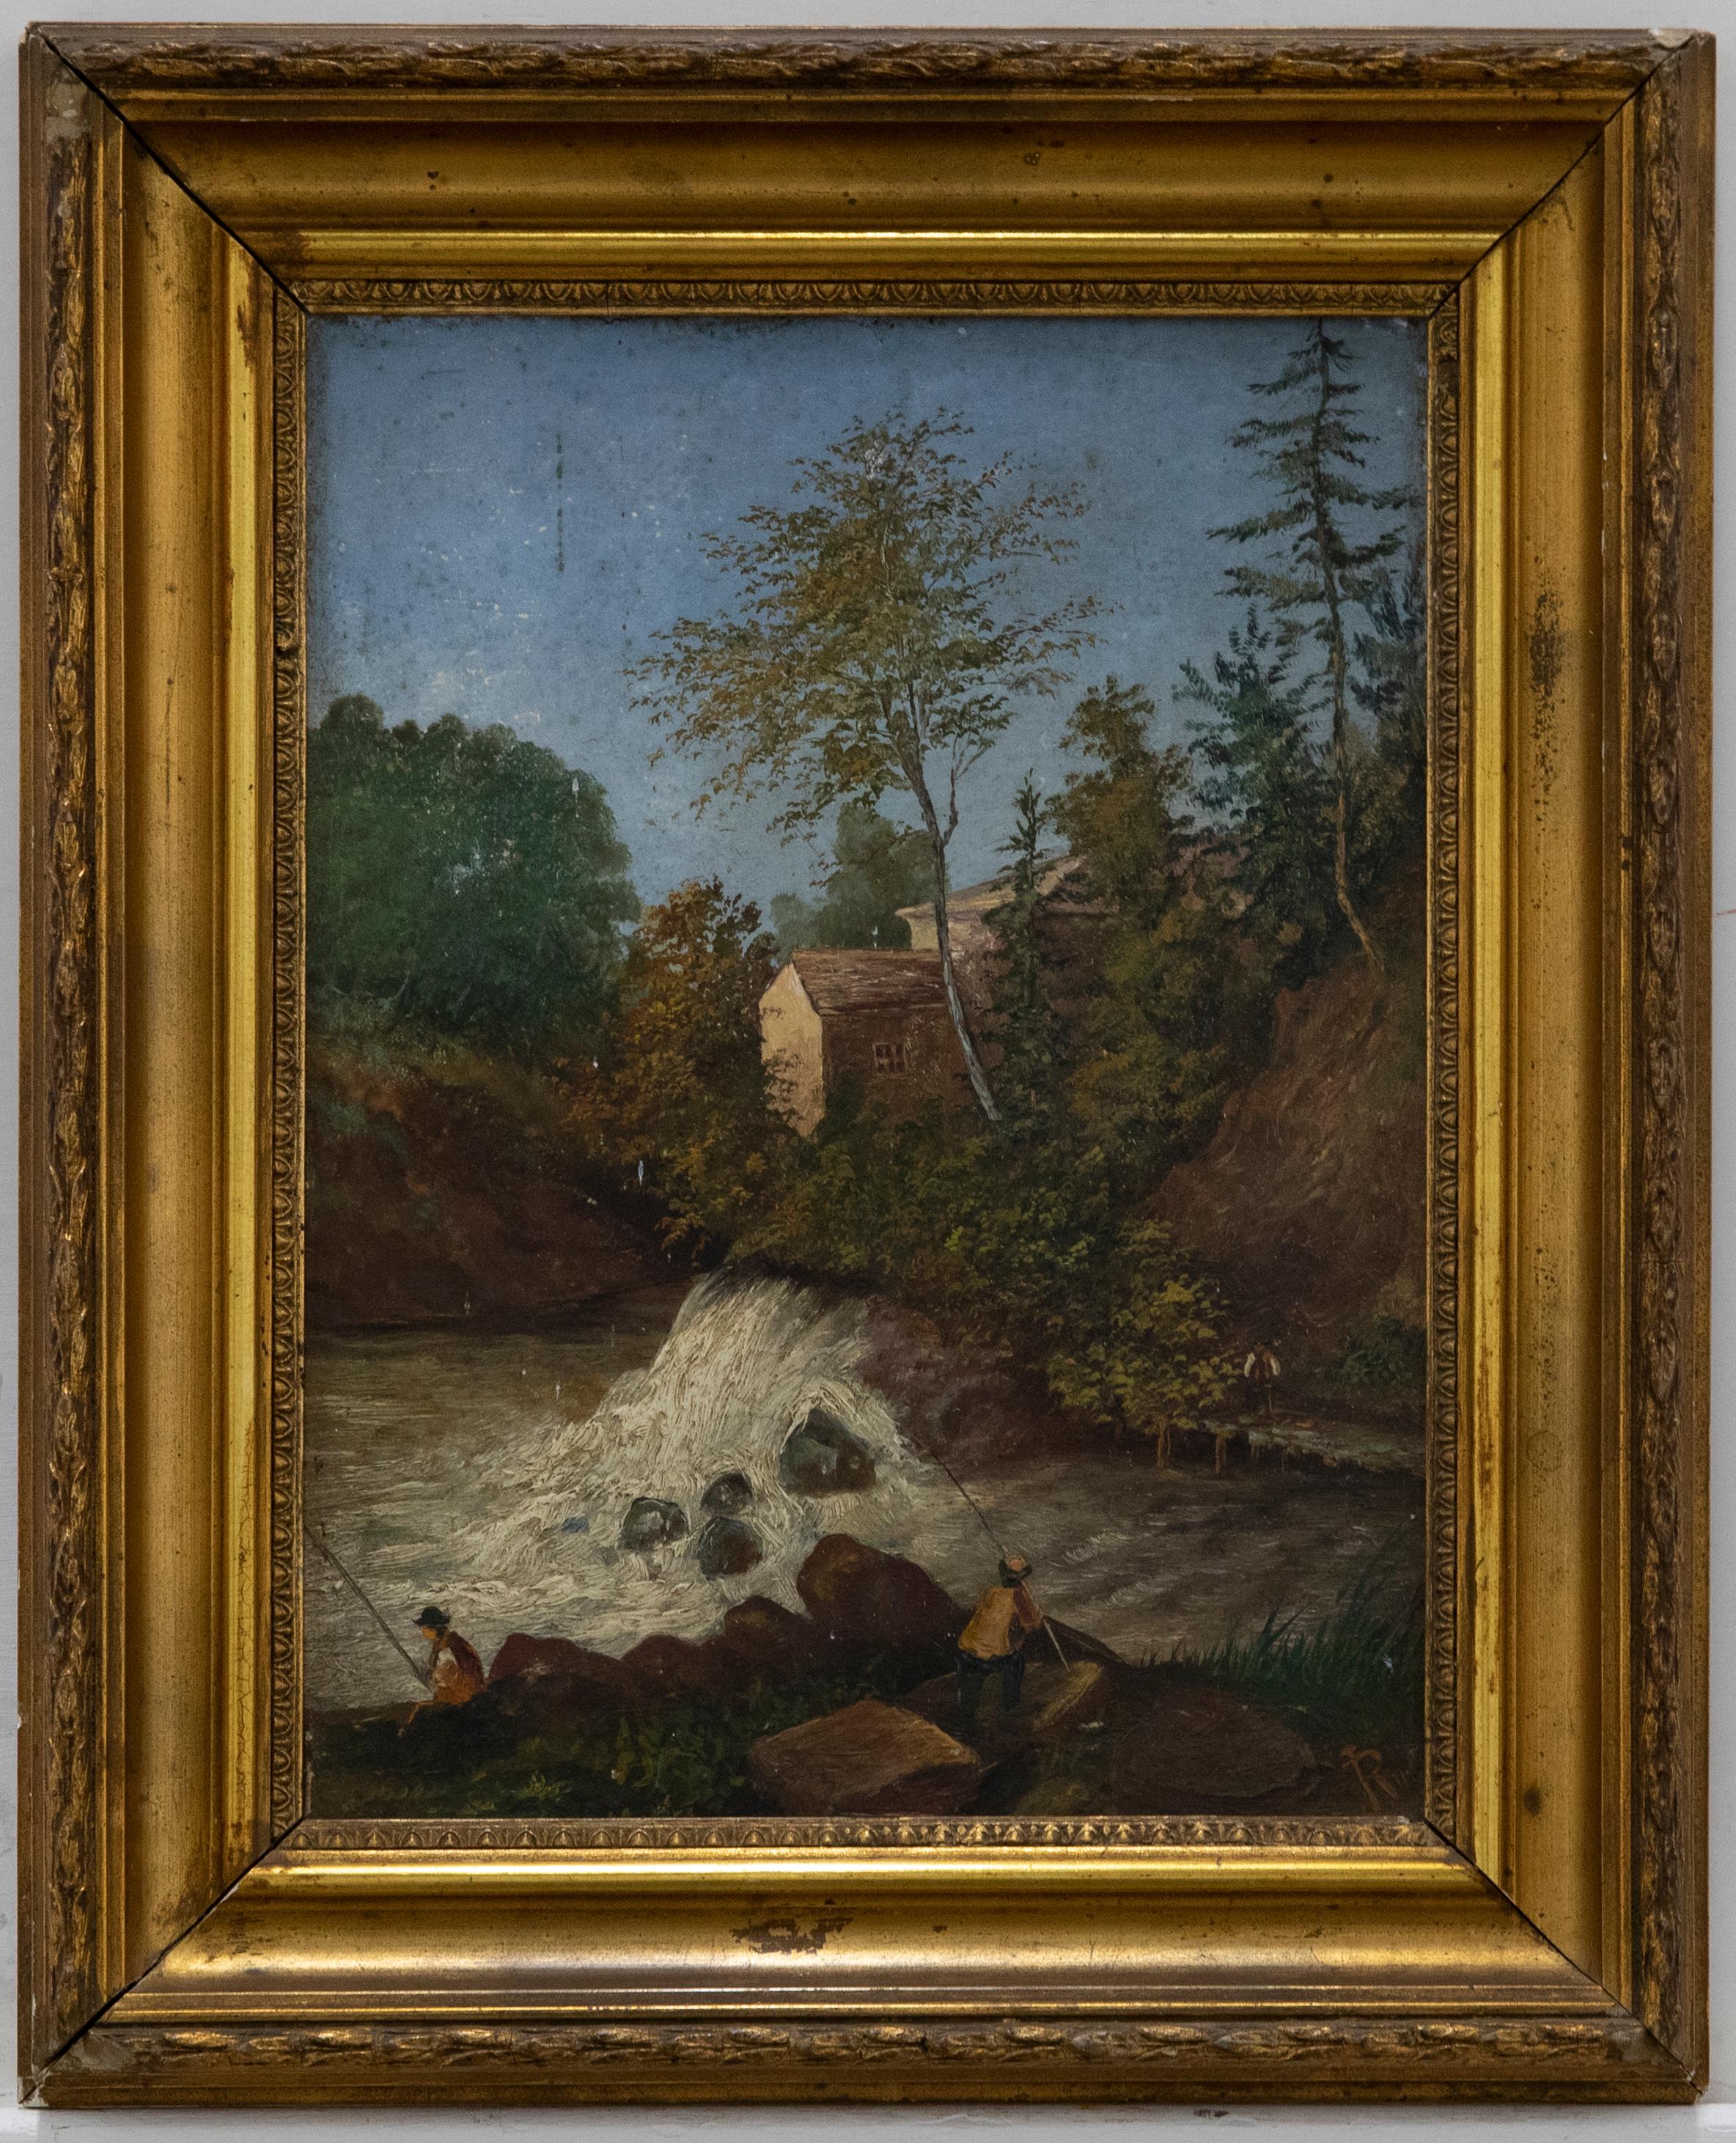 A charming scene depicting two anglers at the base of a weir on a summer's day. The artist captures the scene with a naïve charm in the simple details of the landscape. Signed and illegibly dated to the lower right. Presented in a gilt frame with